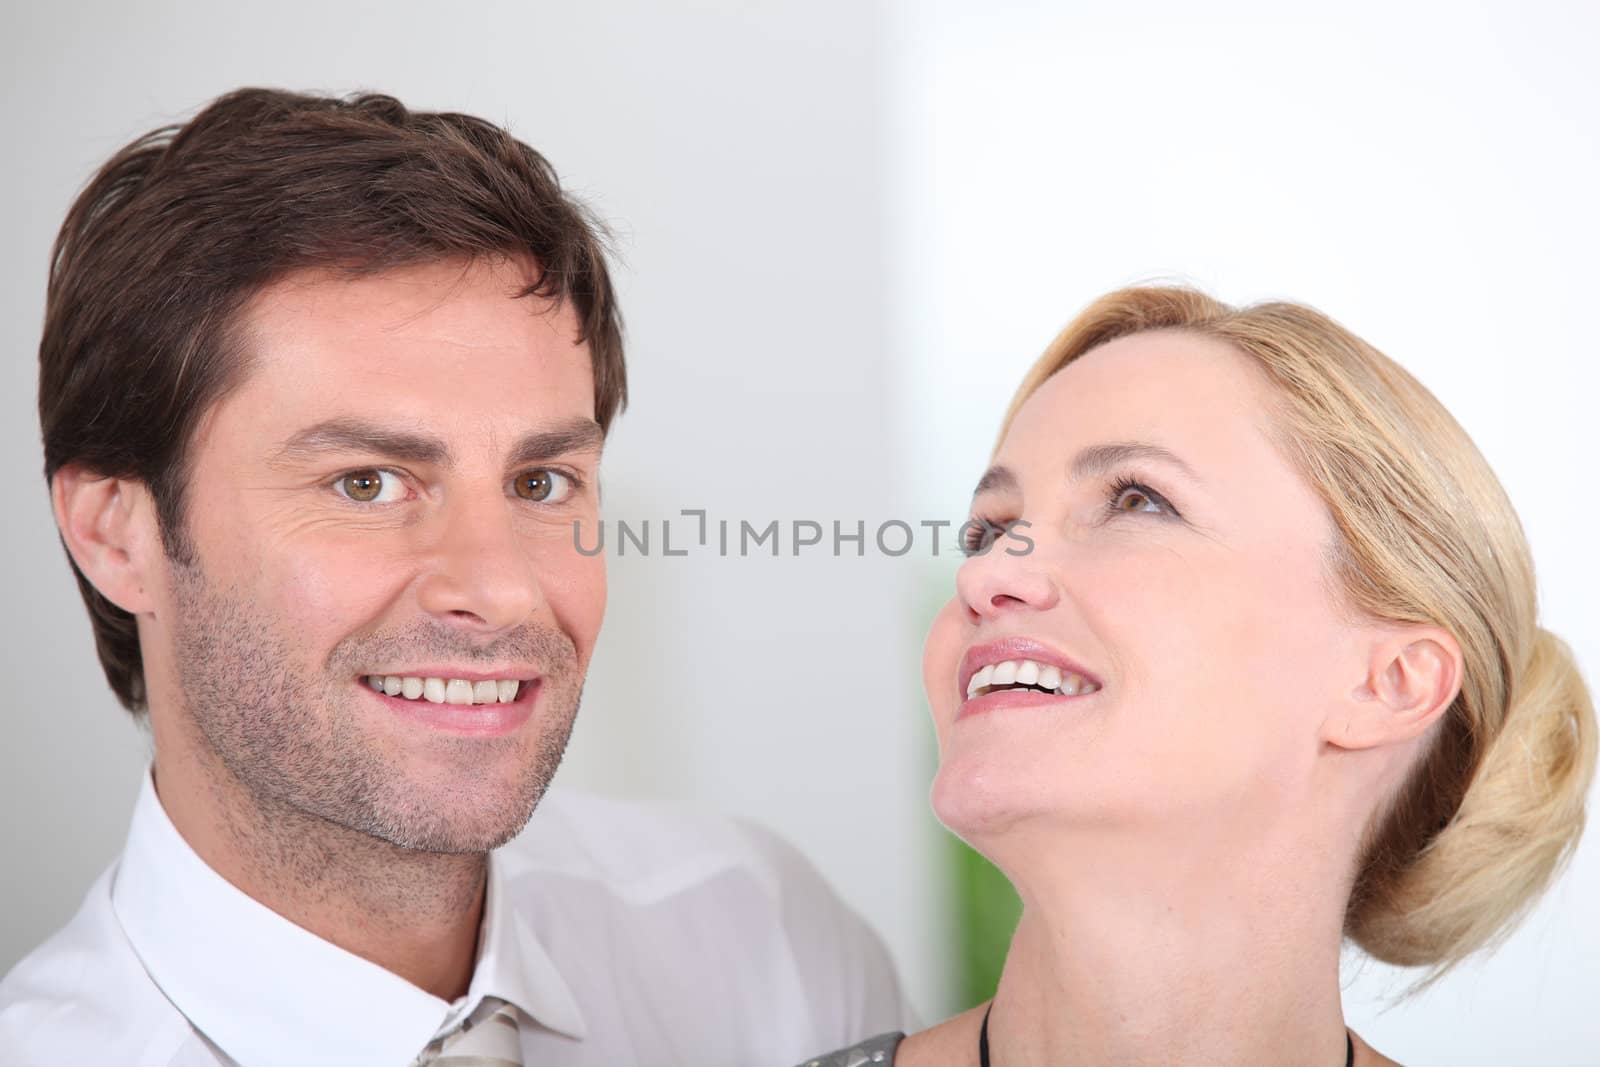 Couple laughing